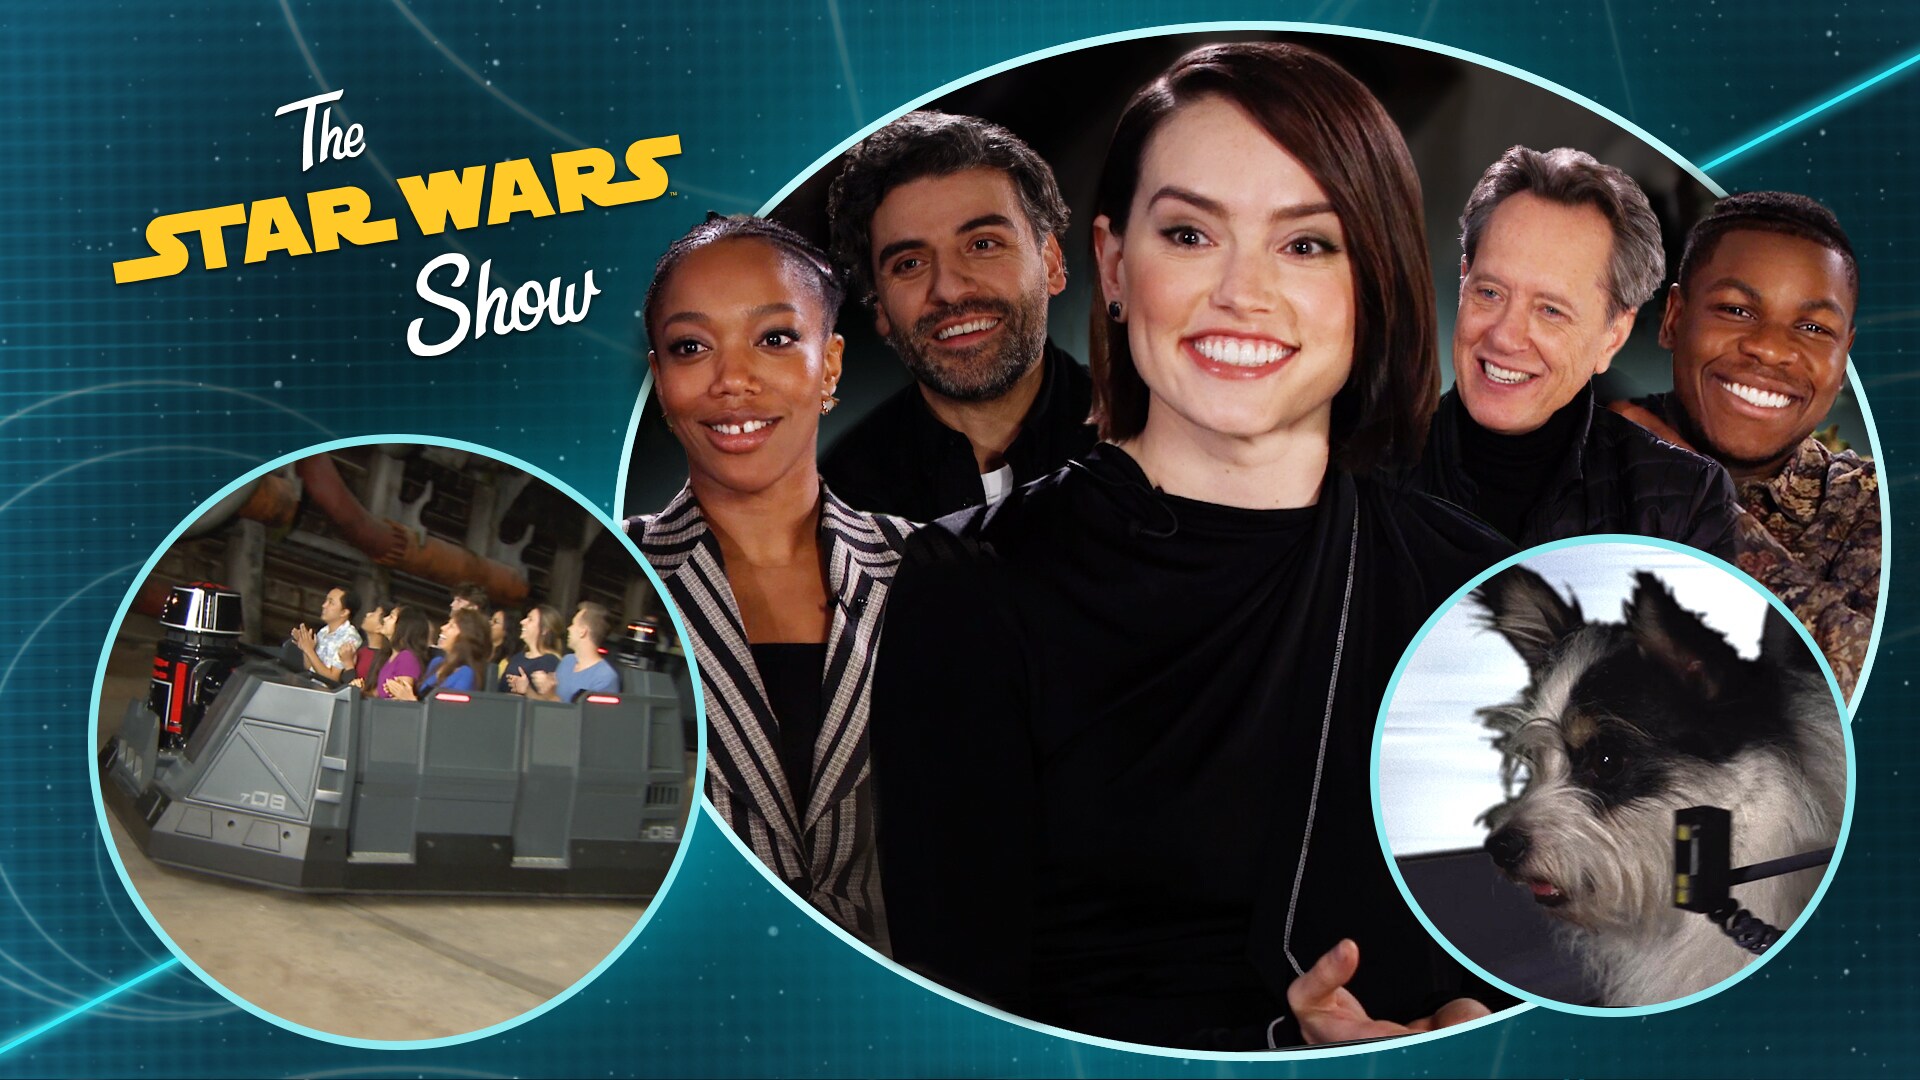 The Rise of Skywalker Cast, Galaxy's Edge, Giant Screen Gaming and Adorable Animals, Oh My!